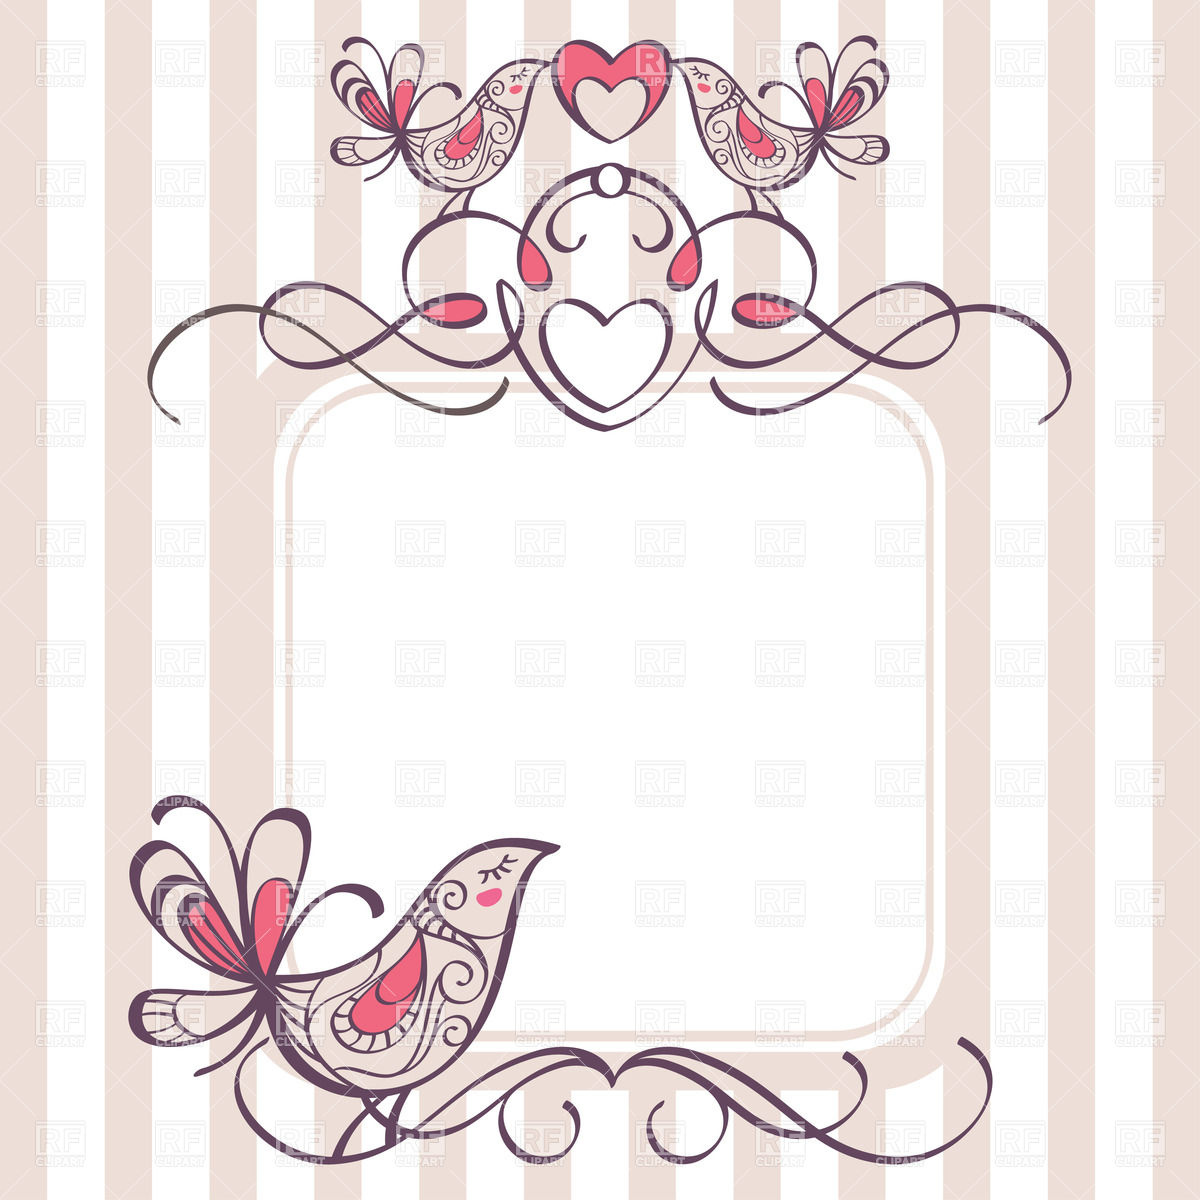 Wedding Frame With Cute Birds Download Royalty Free Vector Clipart